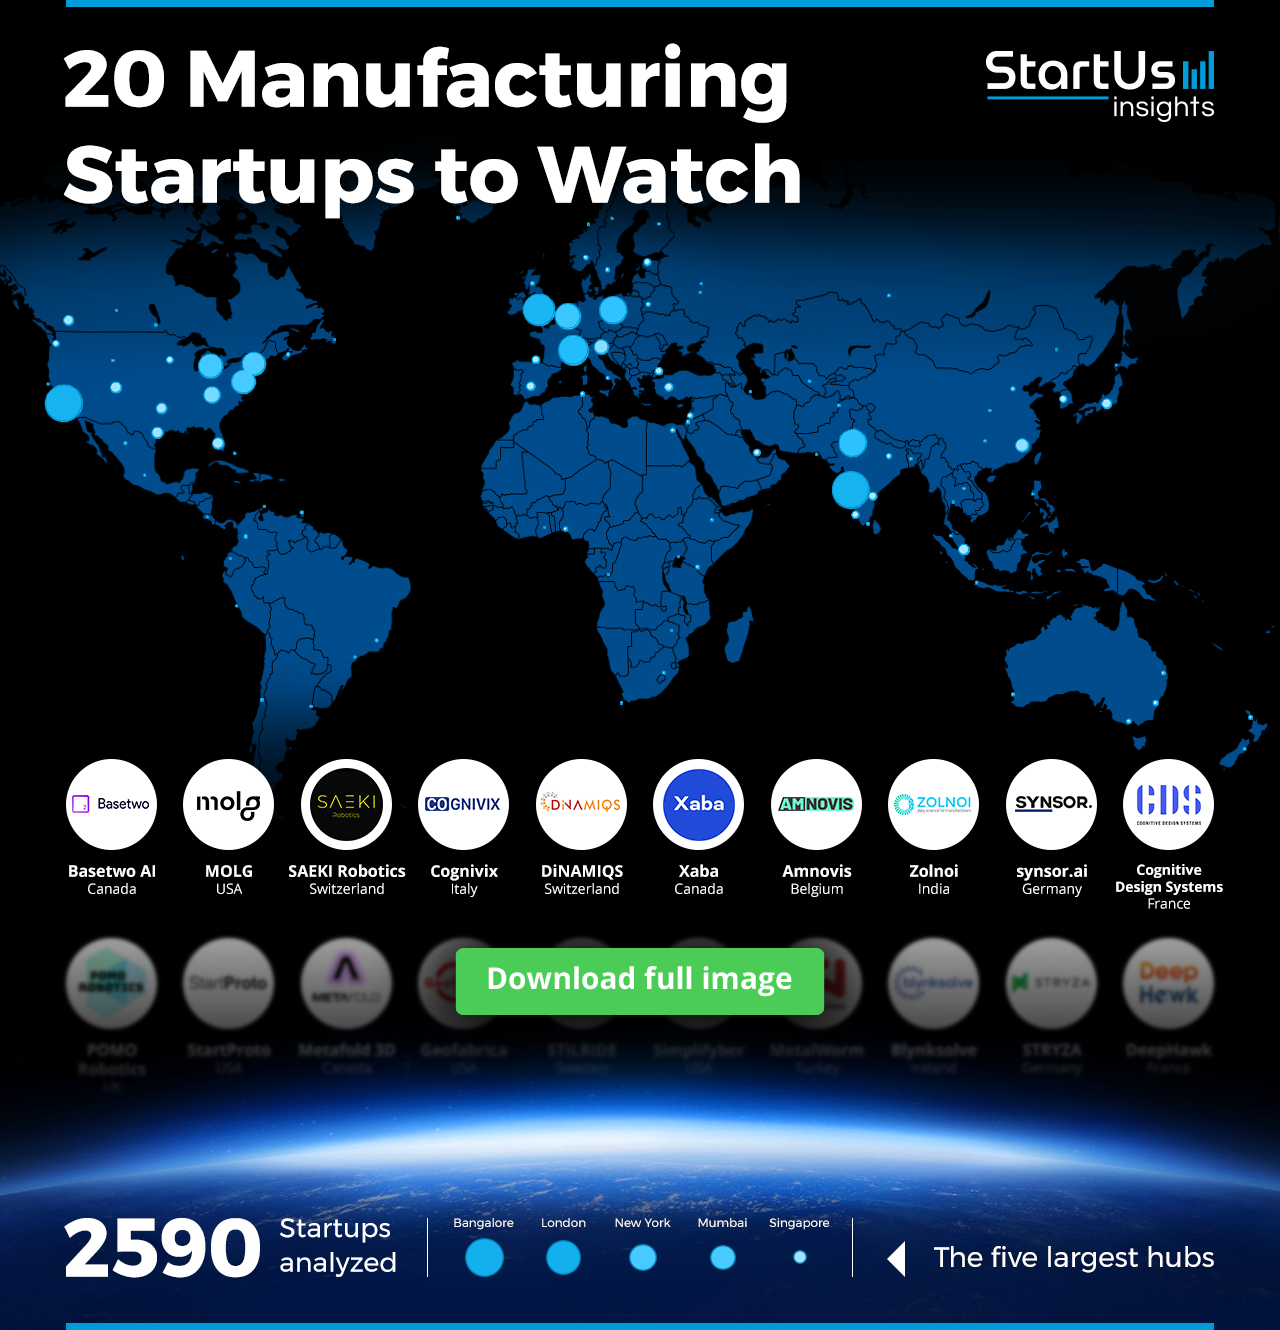 Manufacturing-startups-to-Watch-Heat-Map-Blurred-StartUs-Insights-noresize